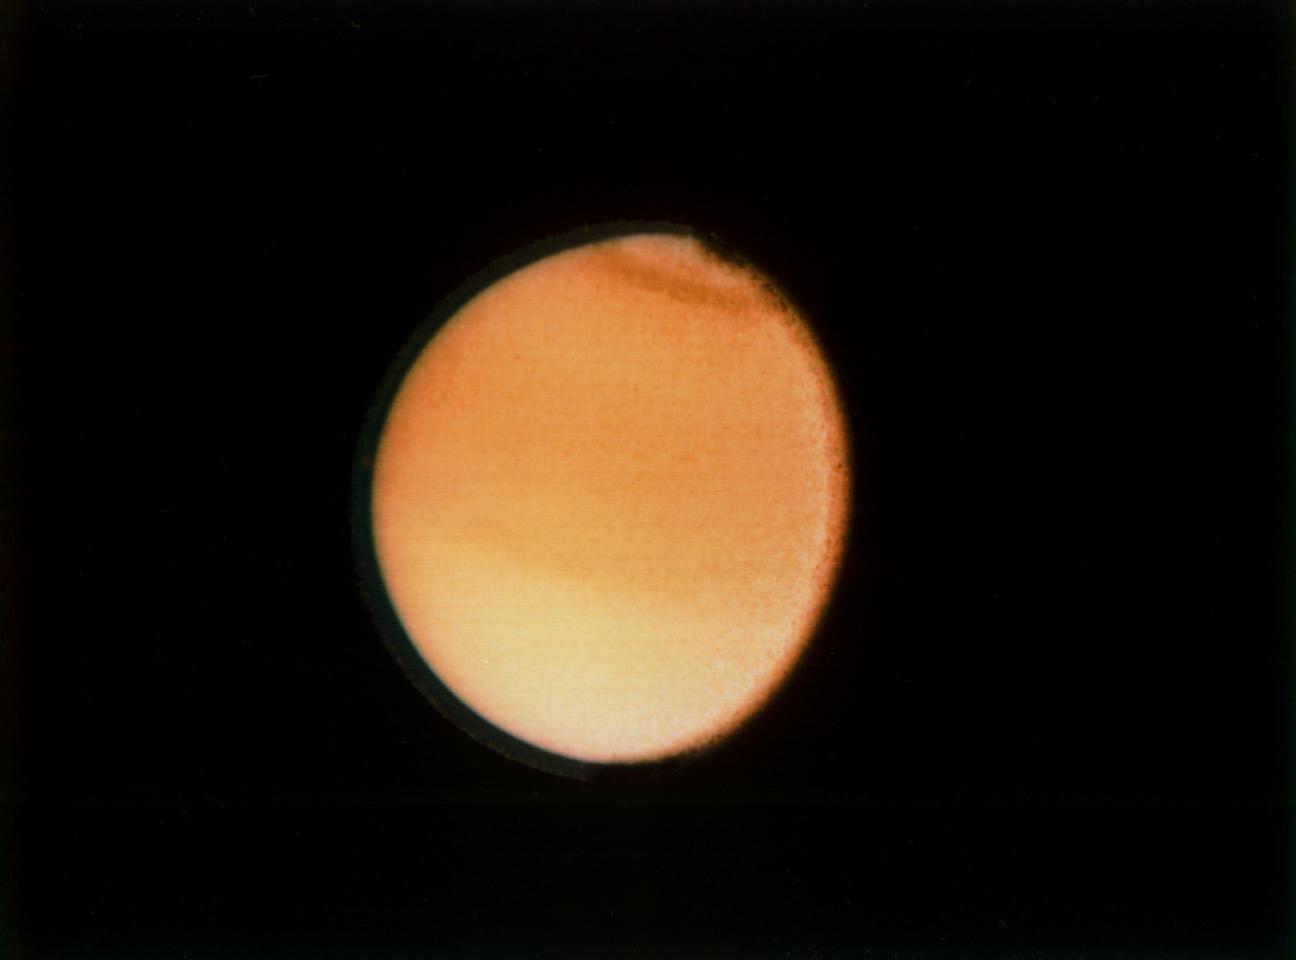 This image of Titan obtained by Voyager 2